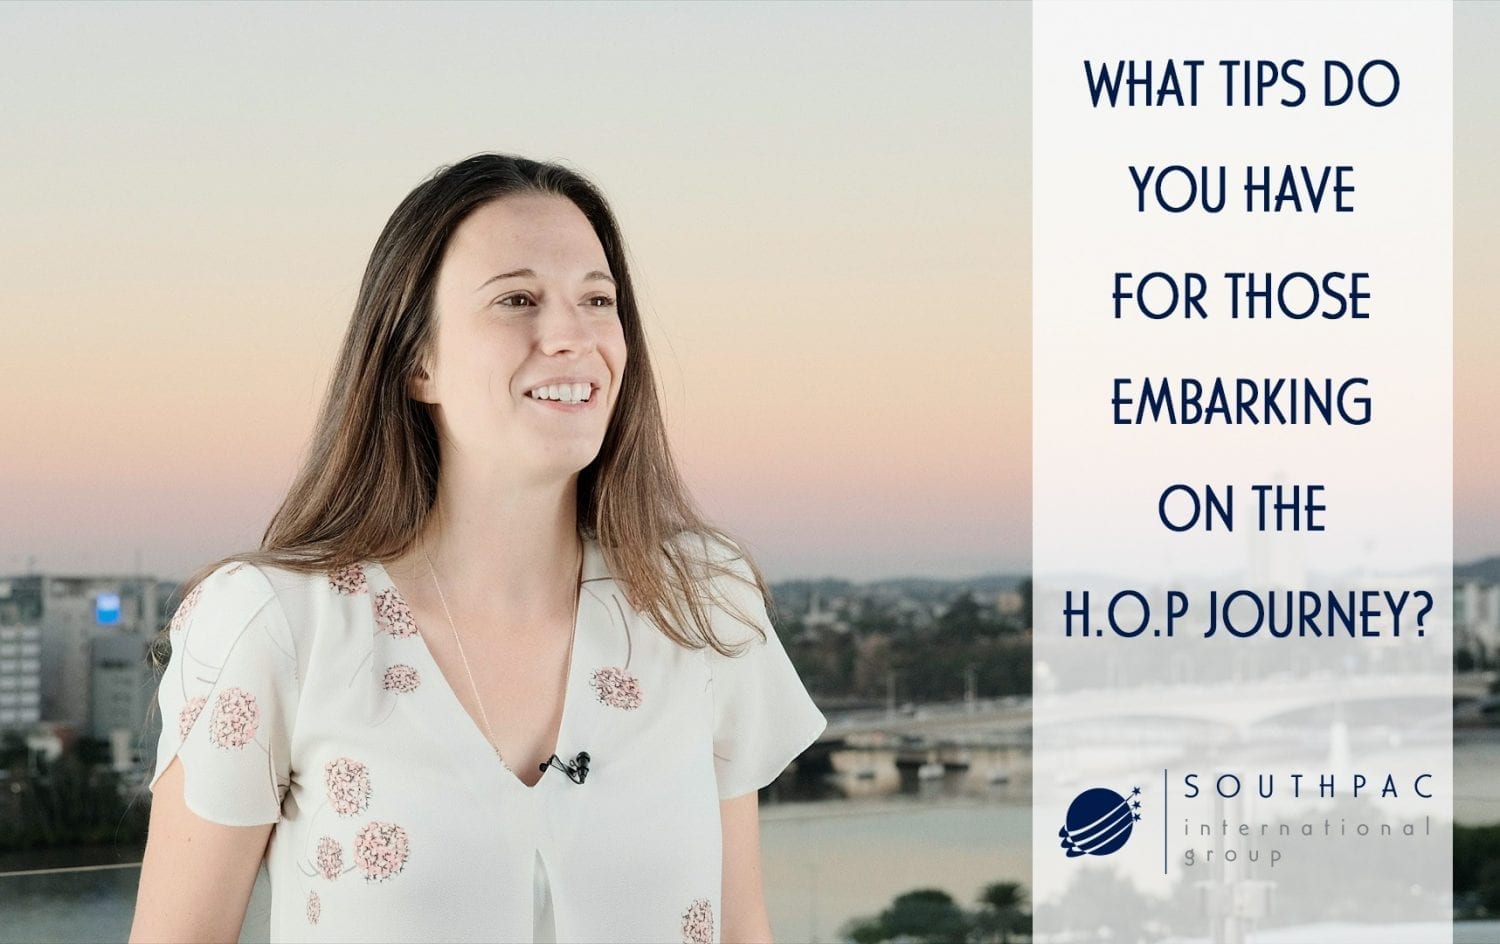 Andrea Bakers, HOP Collaborator thoughts on "What tips do you have for those embarking on the H.O.P journey?"